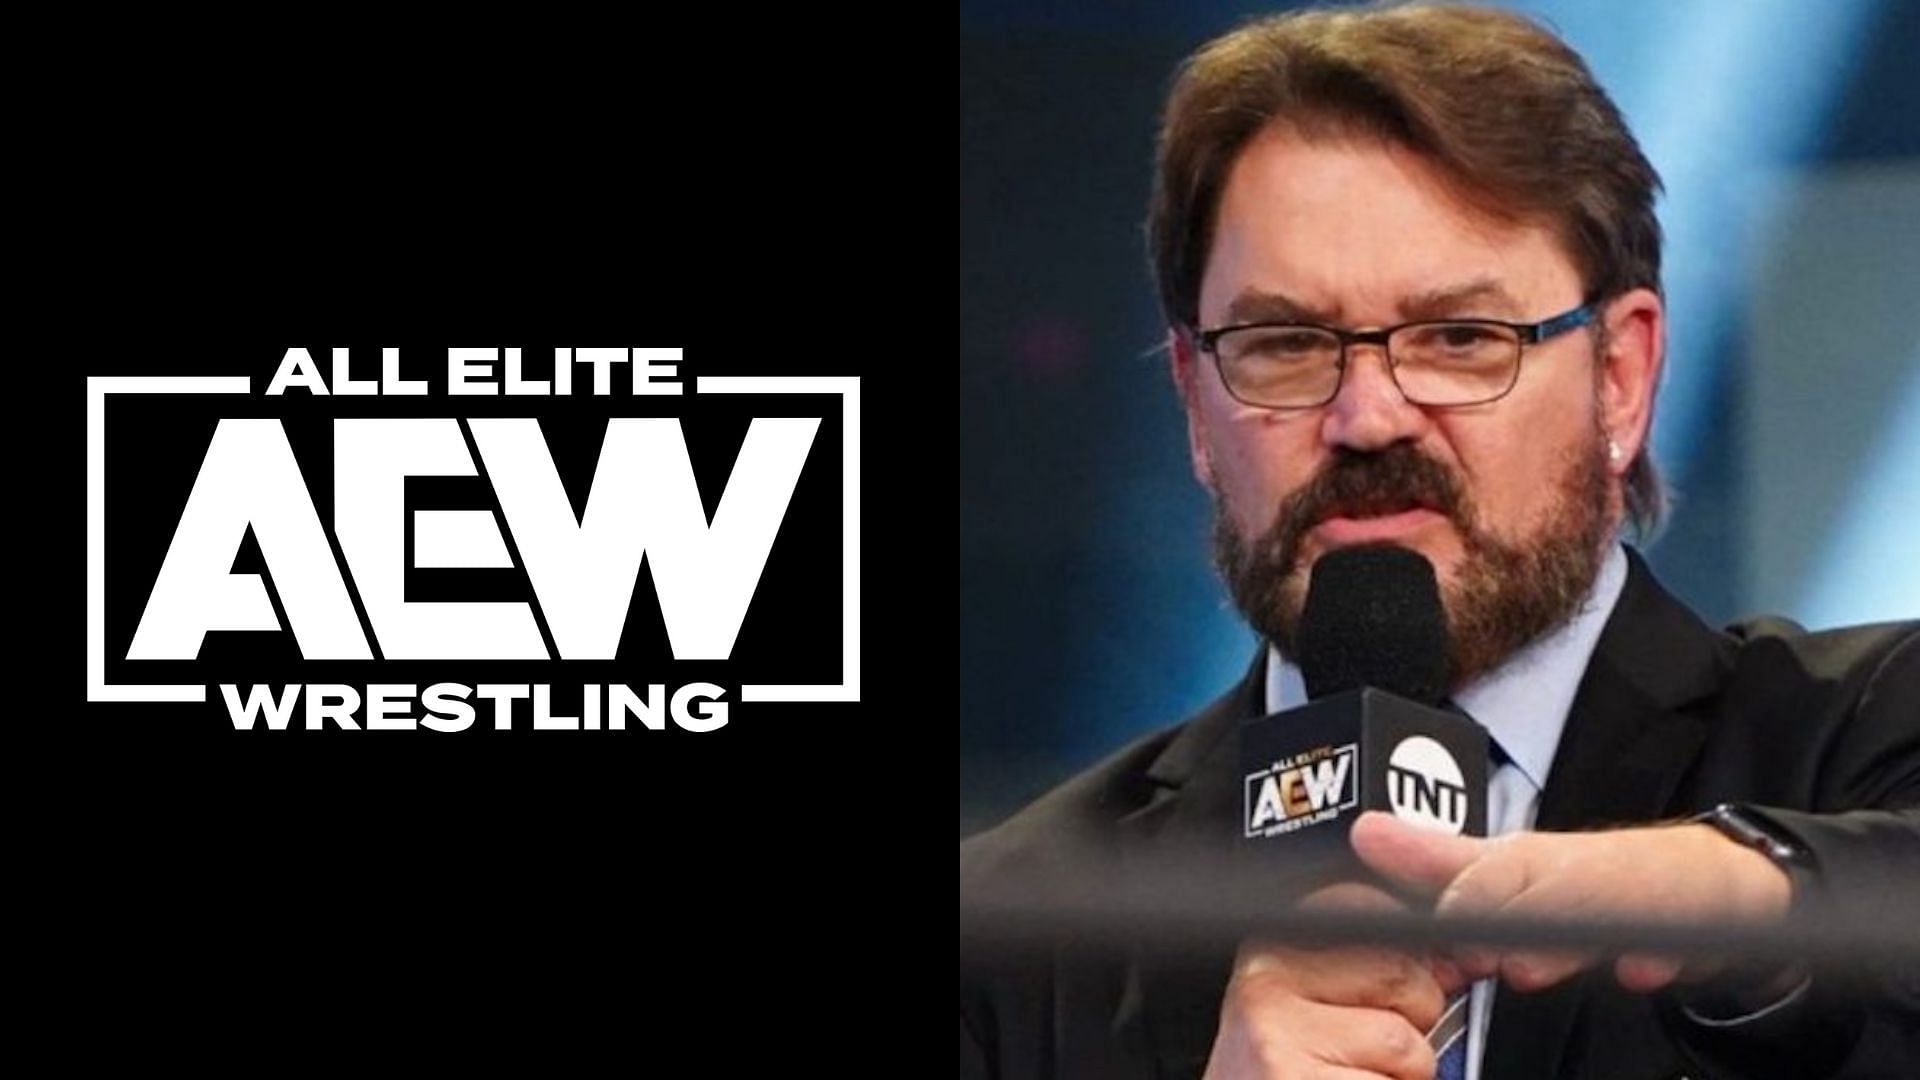 Will this star prove Tony Schiavone wrong?